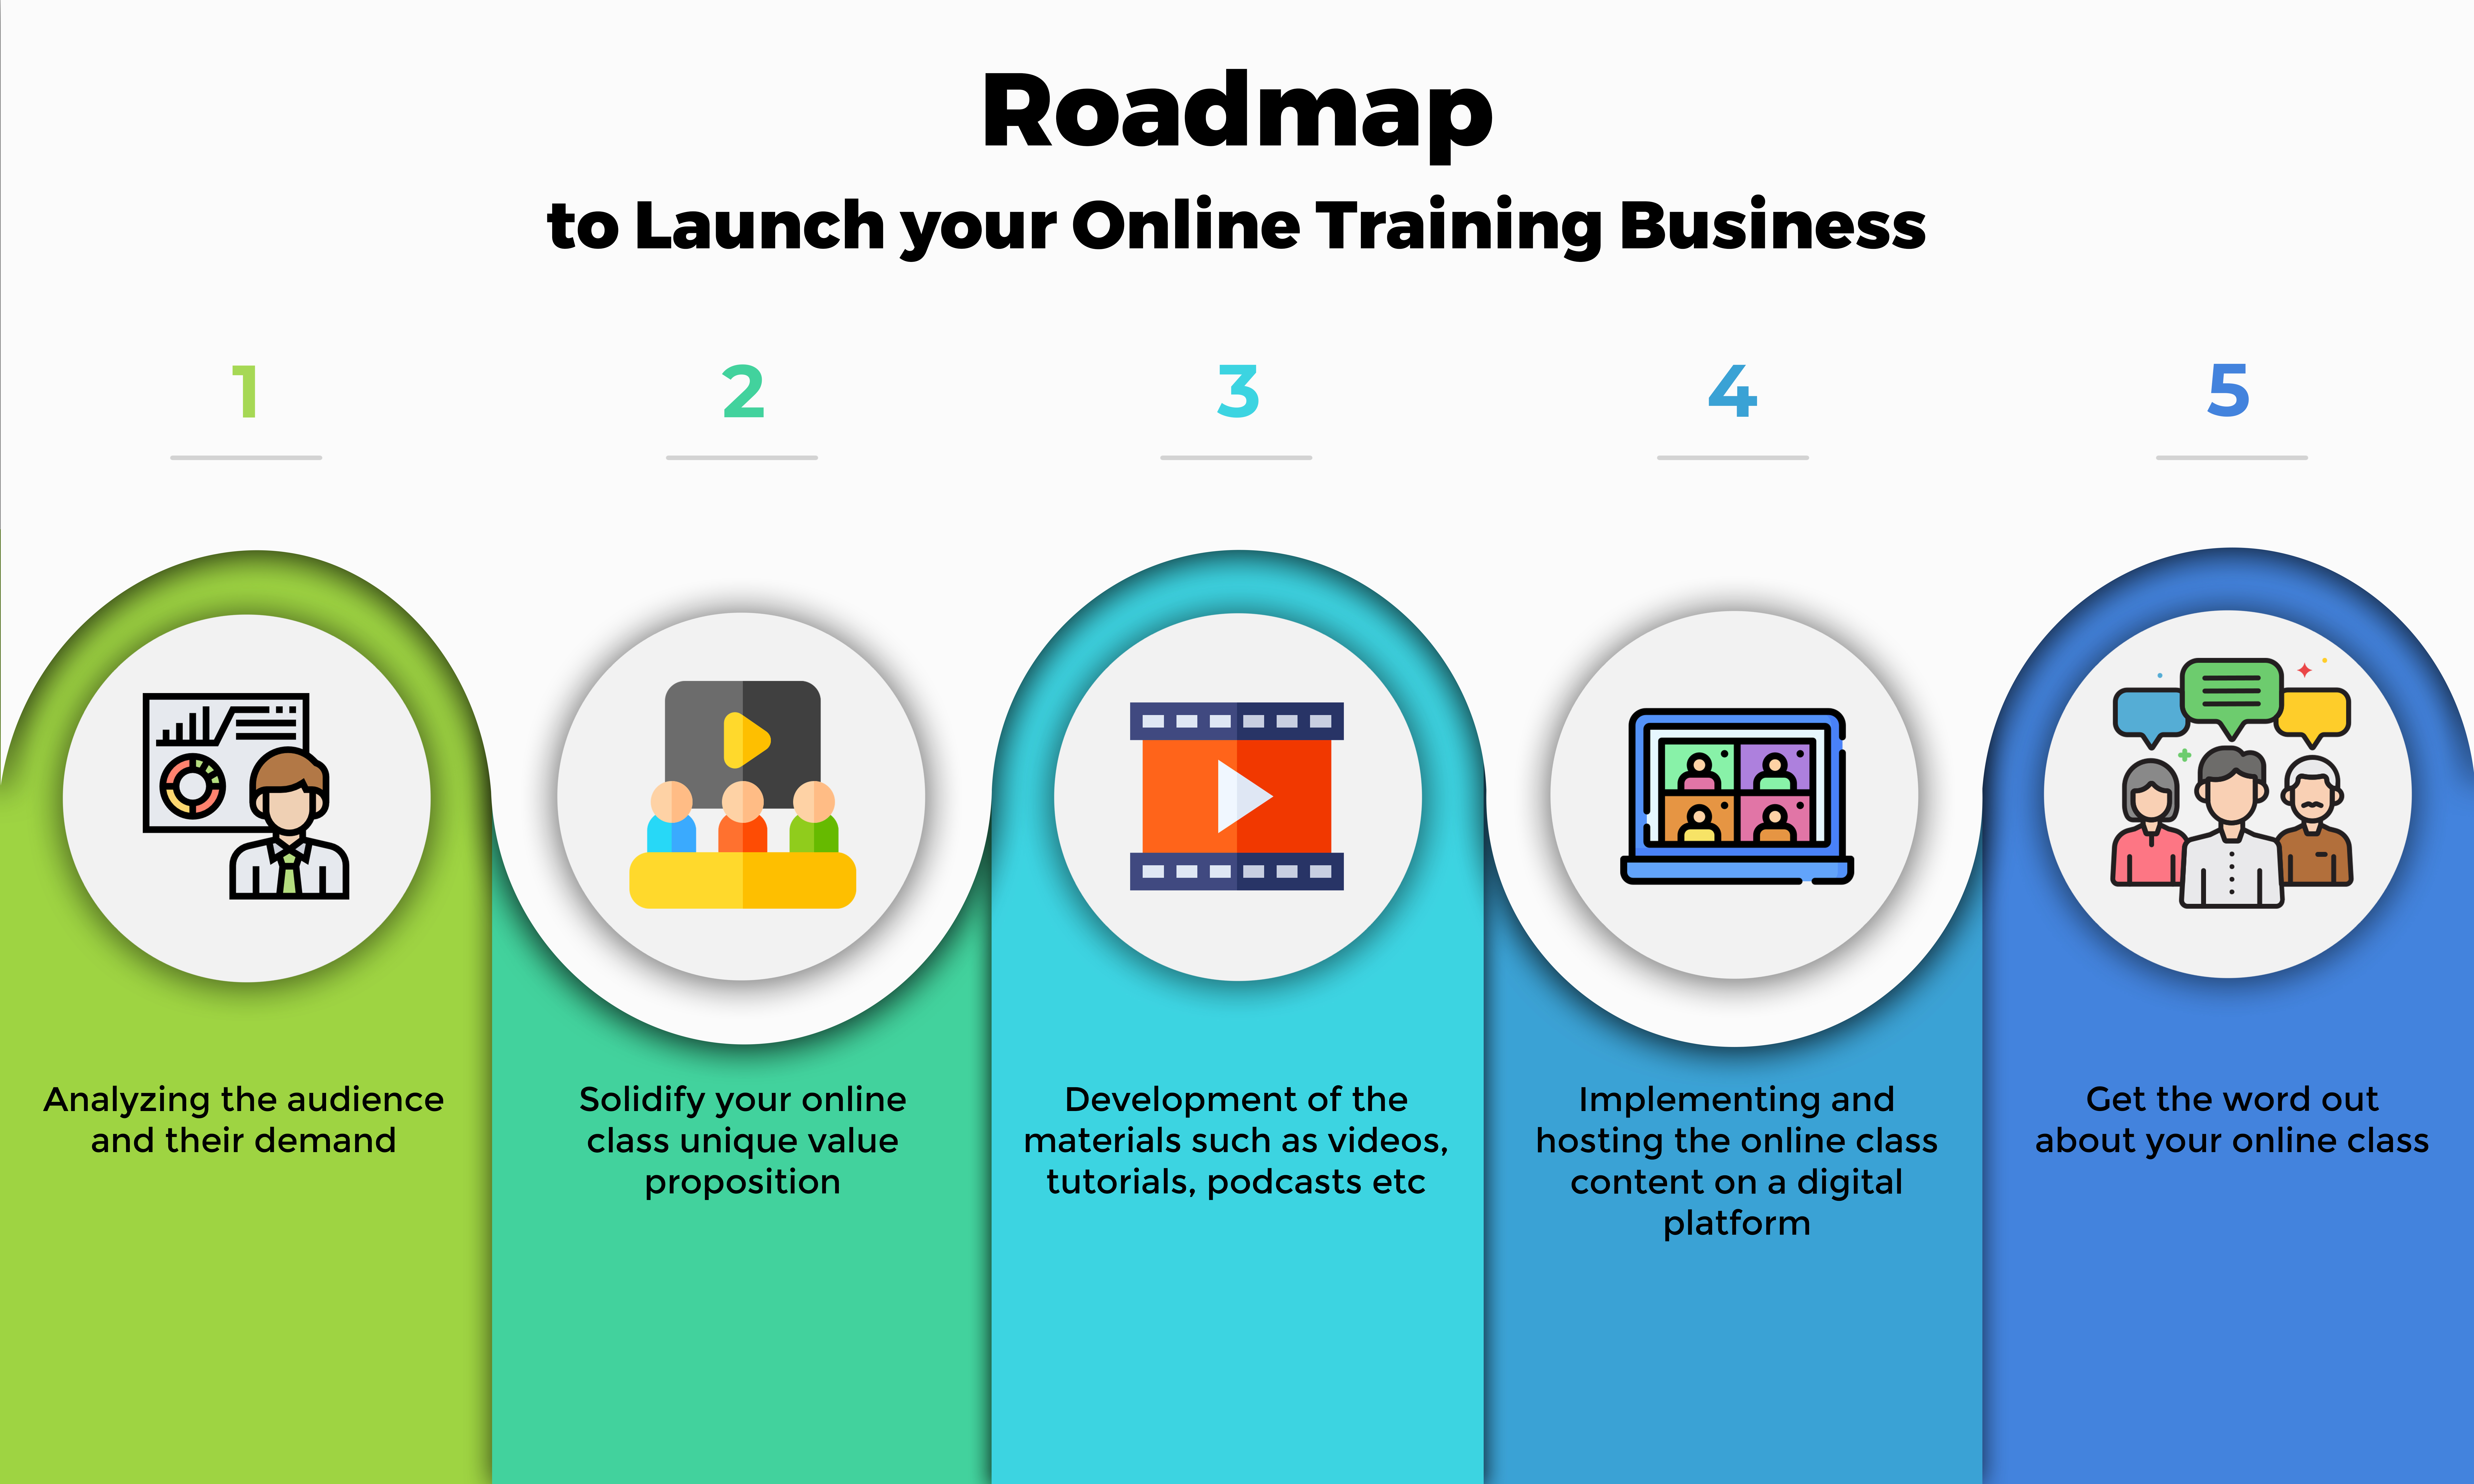 Roadmap to Launch your Online Training Business